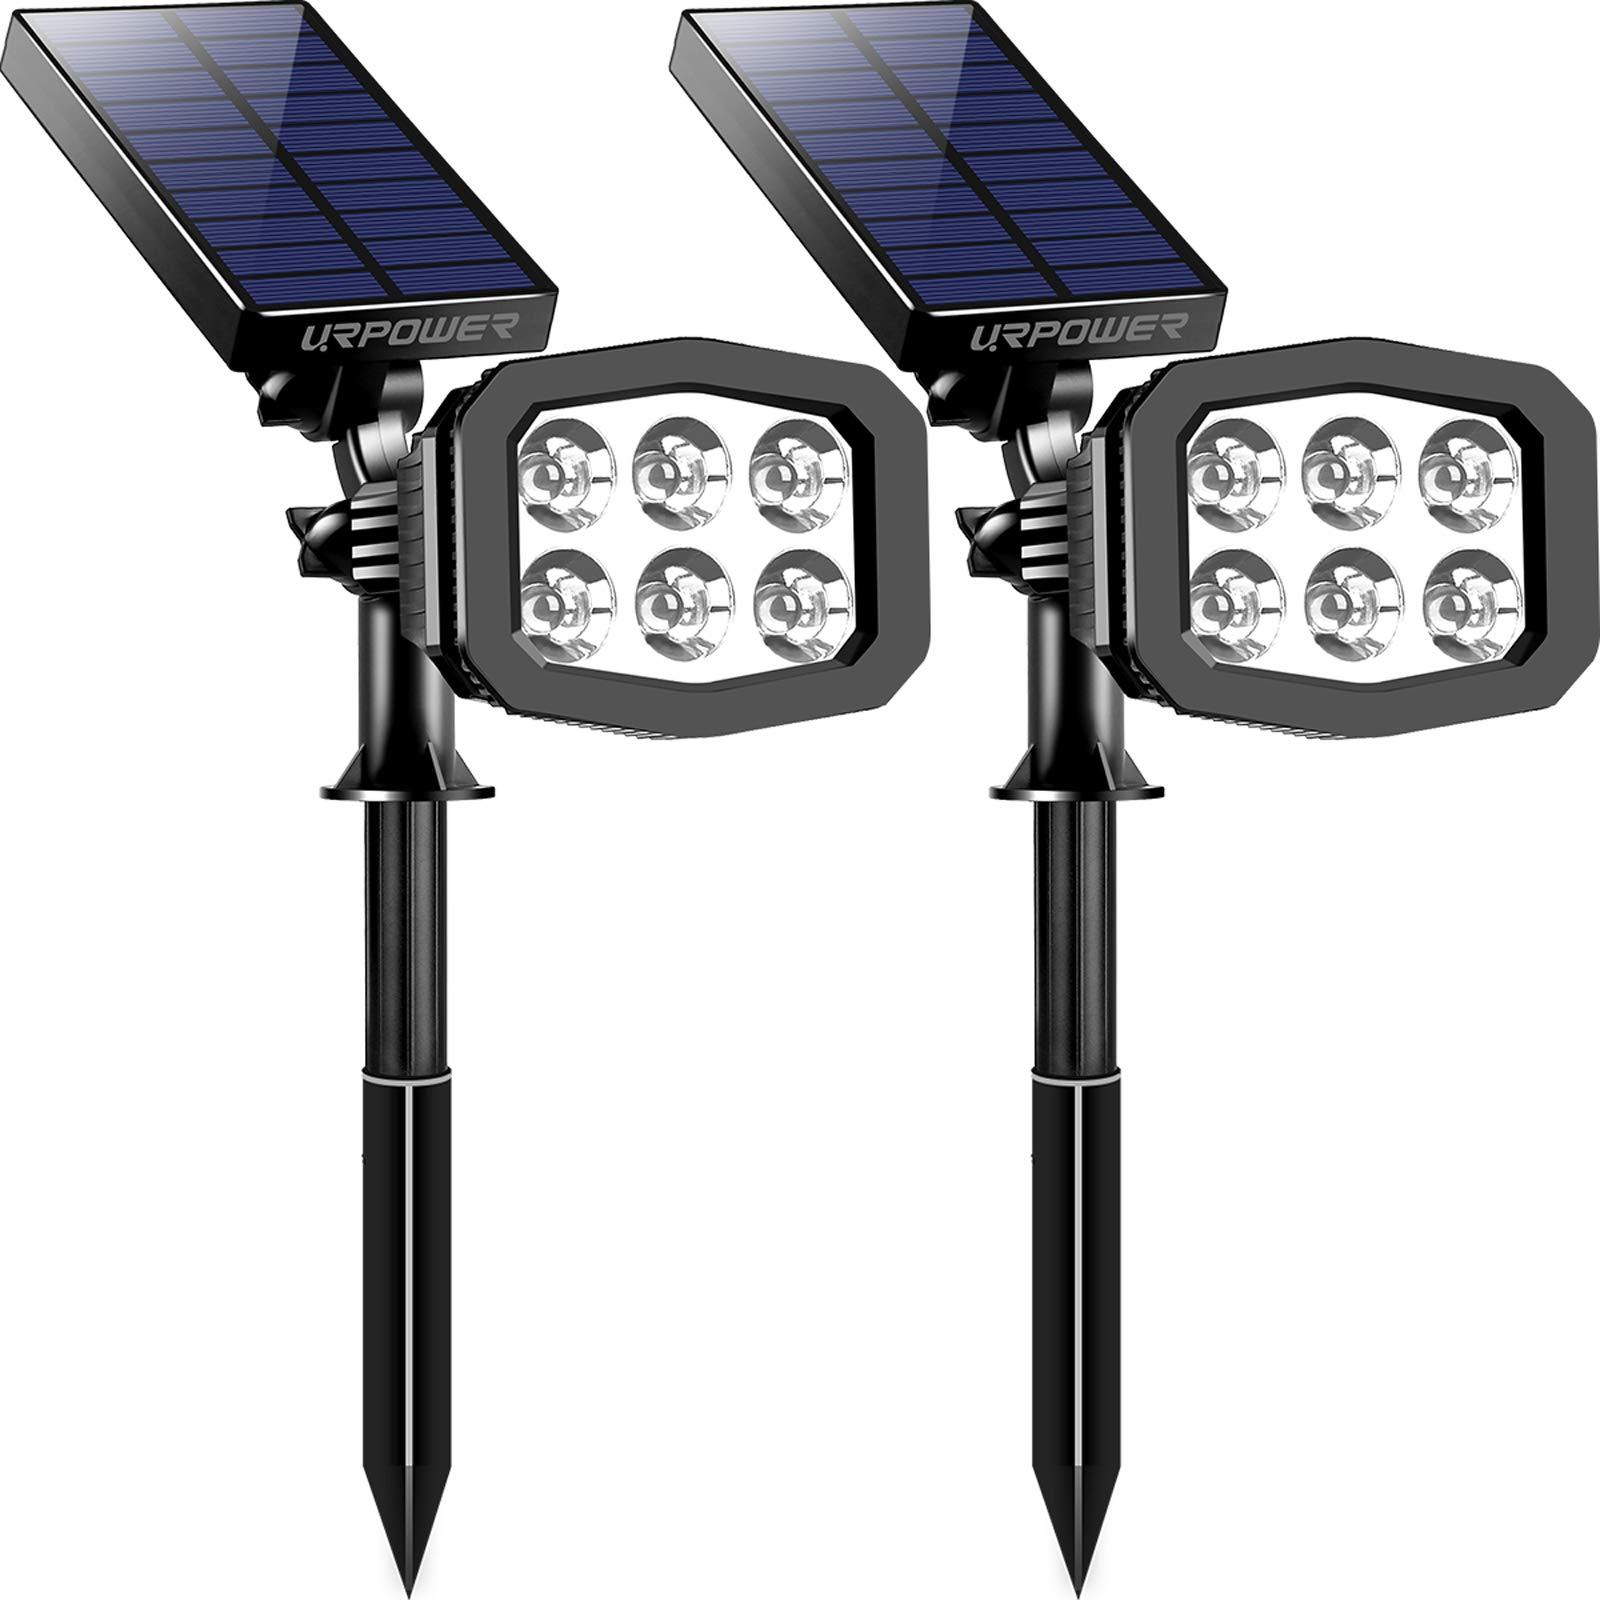 URPOWER Solar Lights Outdoor, Upgraded 2 Modes Solar Lights 2-in-1 Waterproof Solar Spotlight Auto On/Off Solar Wall Lights Pathway Lights Landscape Lighting for Yard Garden Pool- Cool White (2 Pack) - image 1 of 8